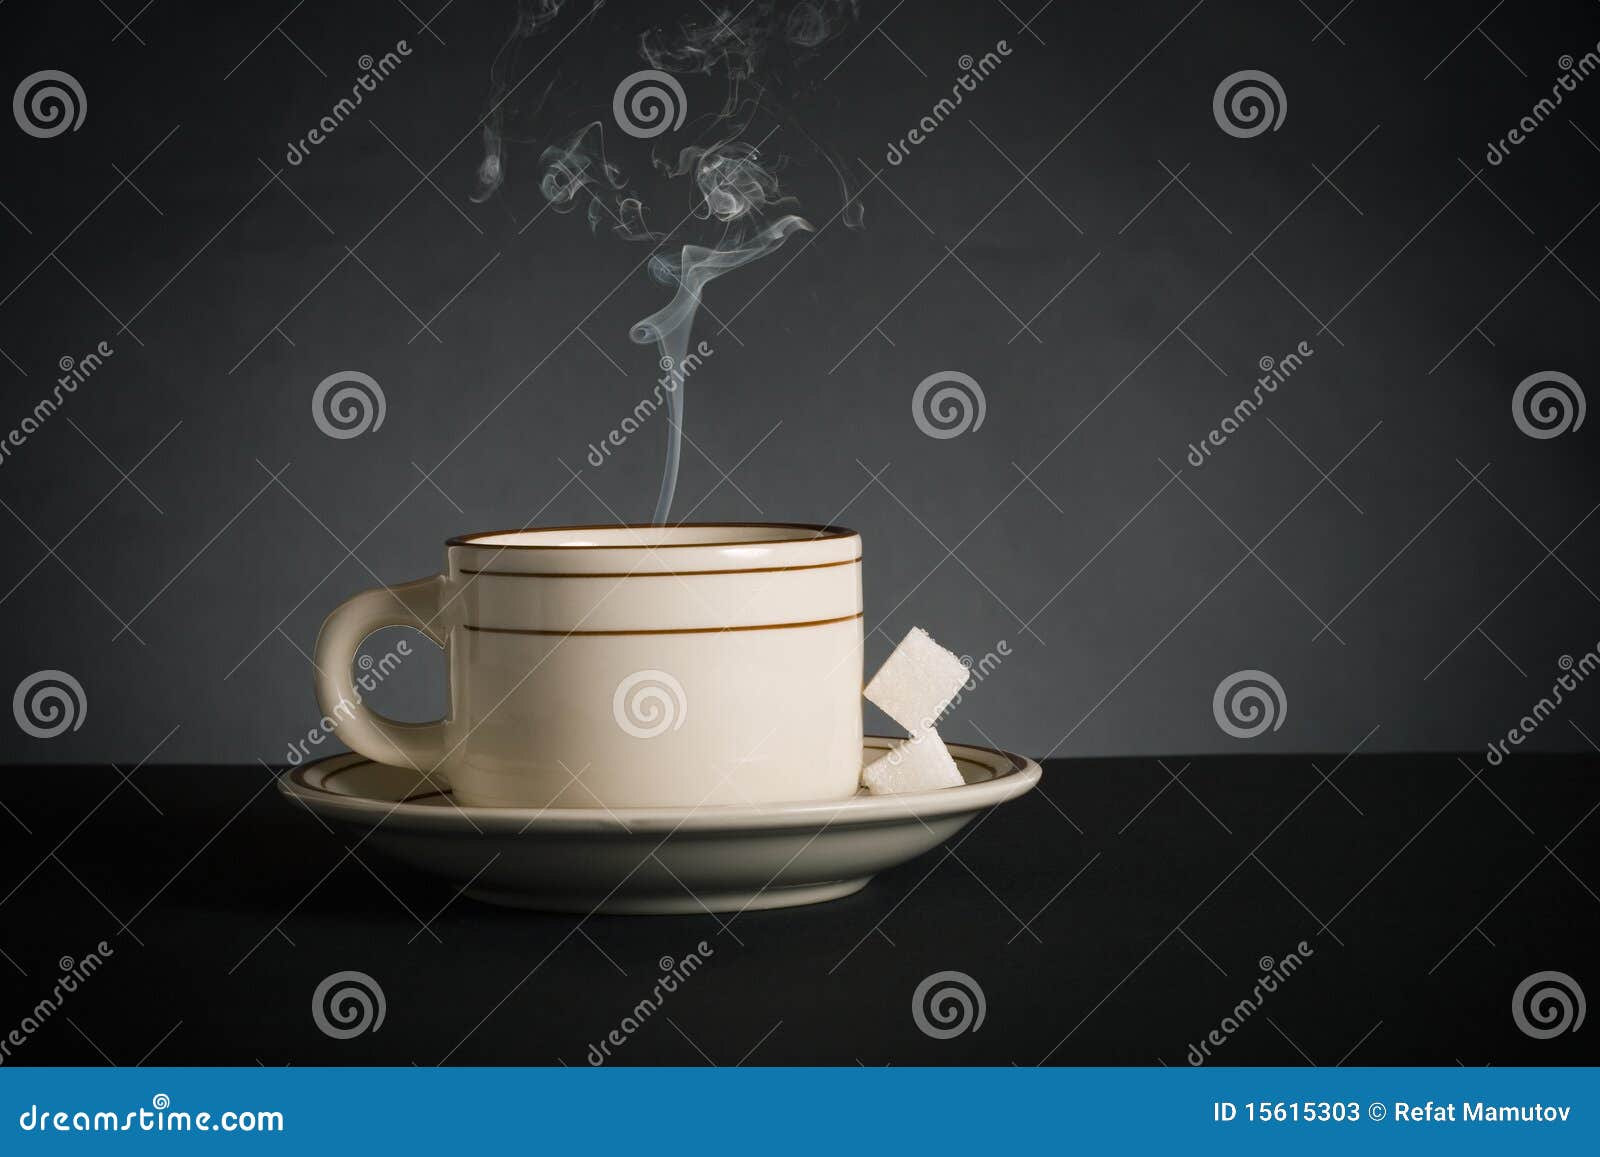 cup of hot drink